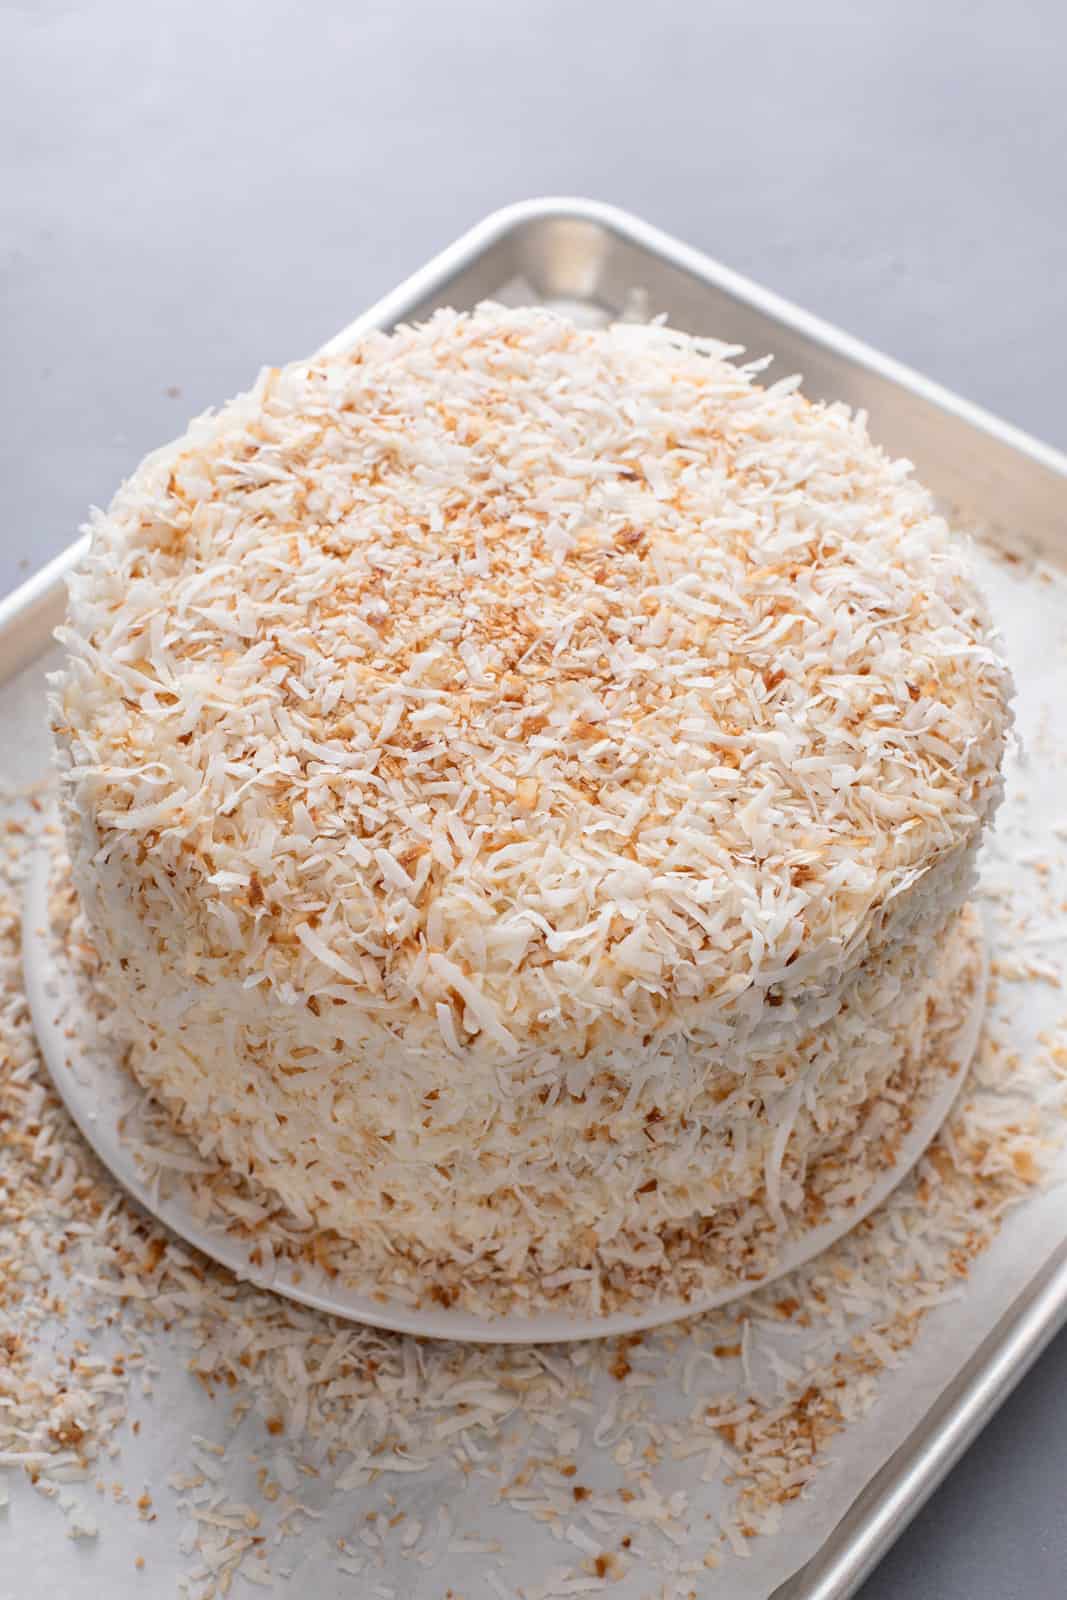 Toasted coconut covering the outside of a coconut cake.